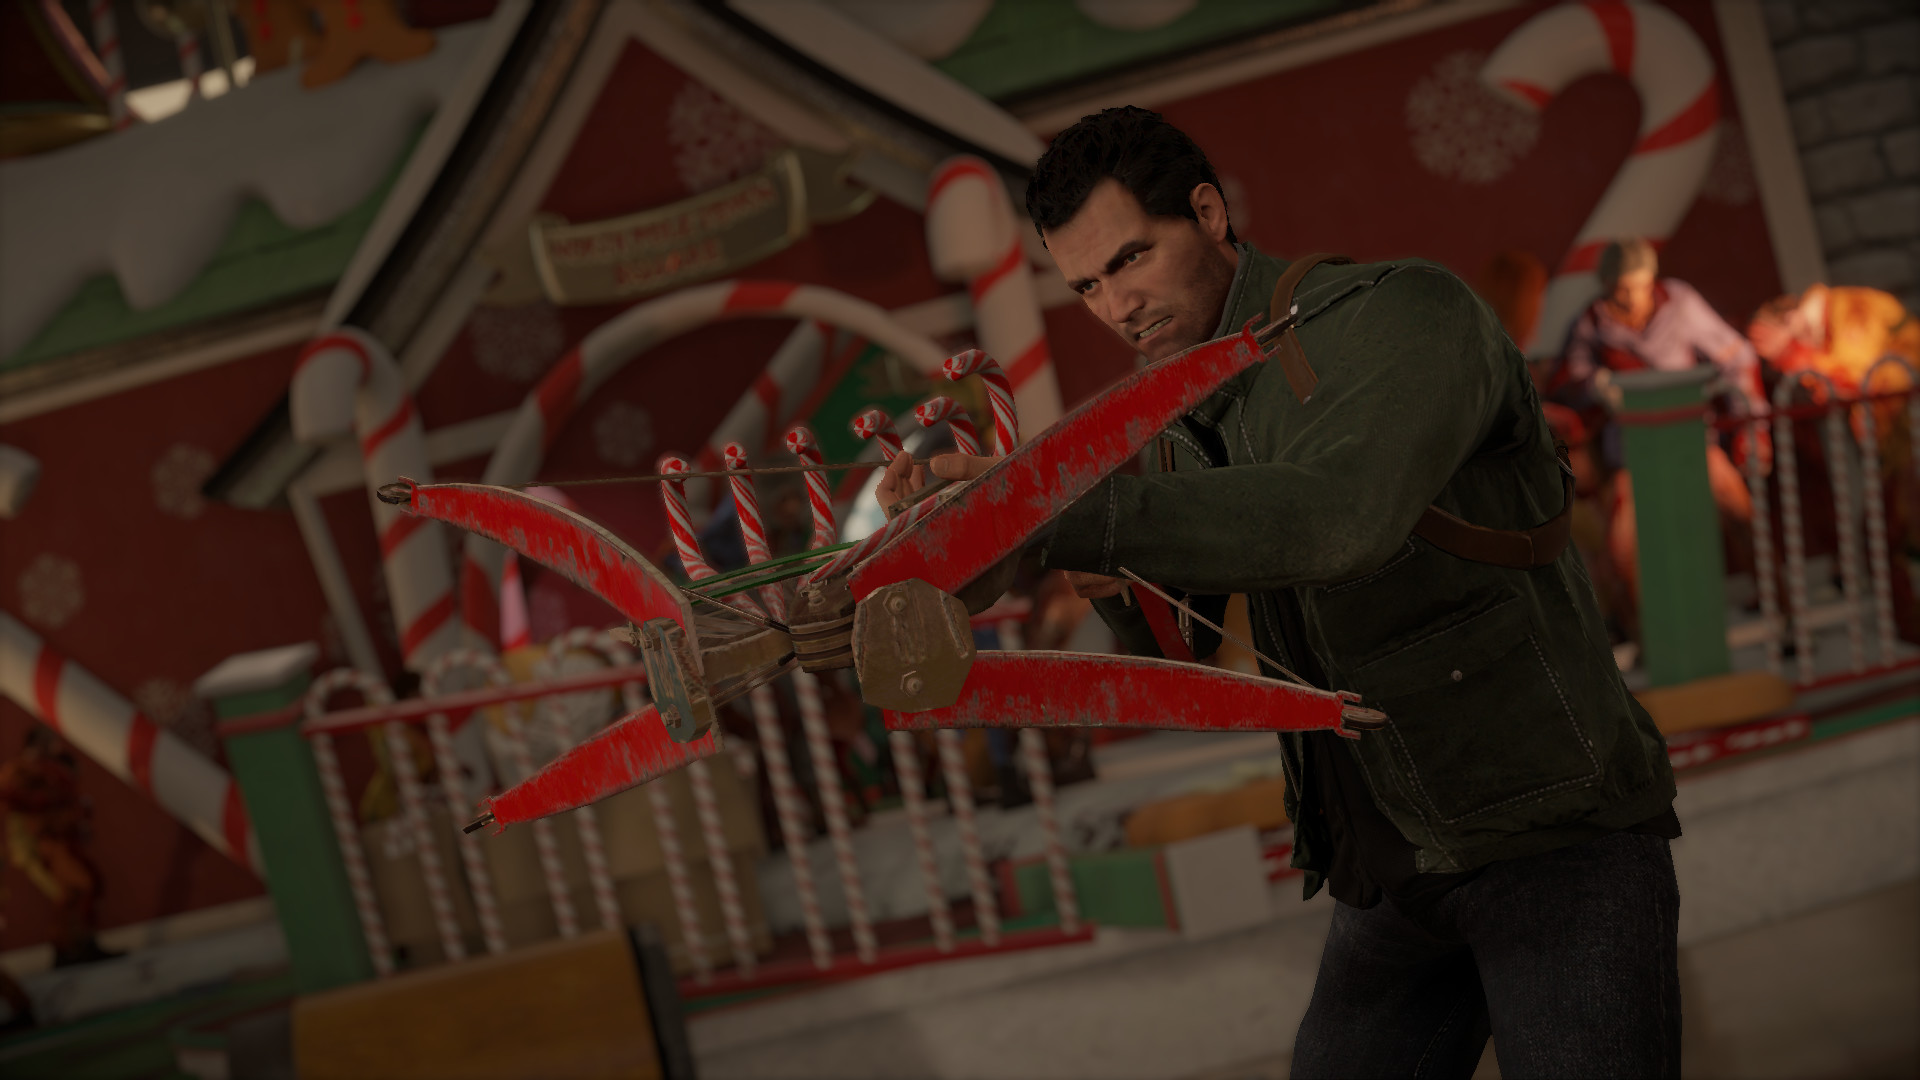 Dead Rising 4 - Candy Cane Crossbow Featured Screenshot #1